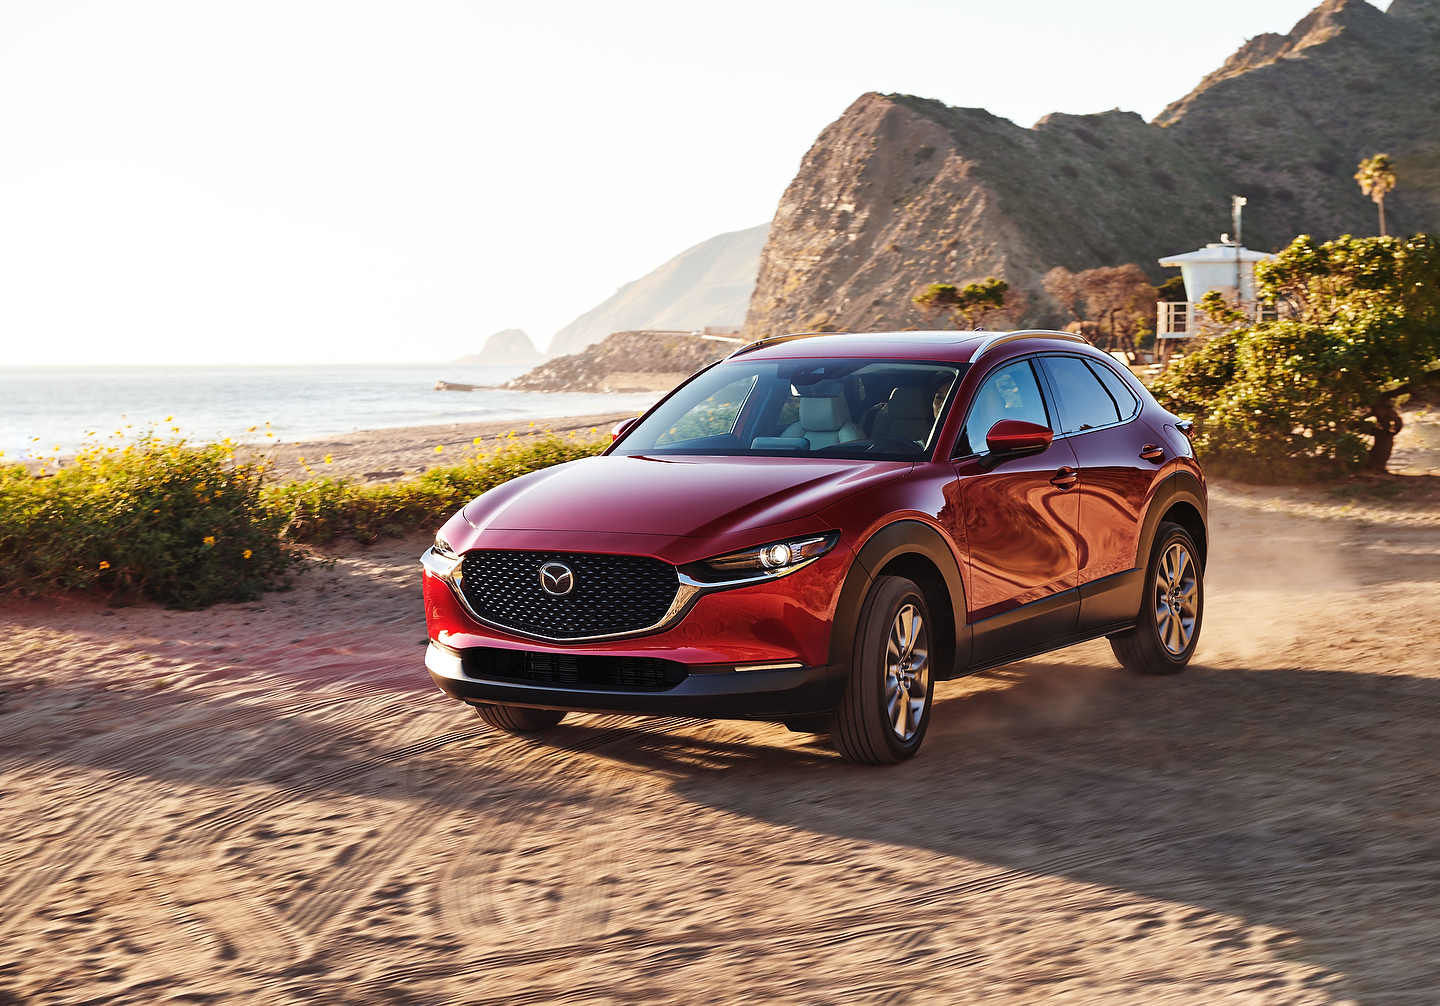 Why the Mazda CX-30 is Superior to the Nissan Qashqai